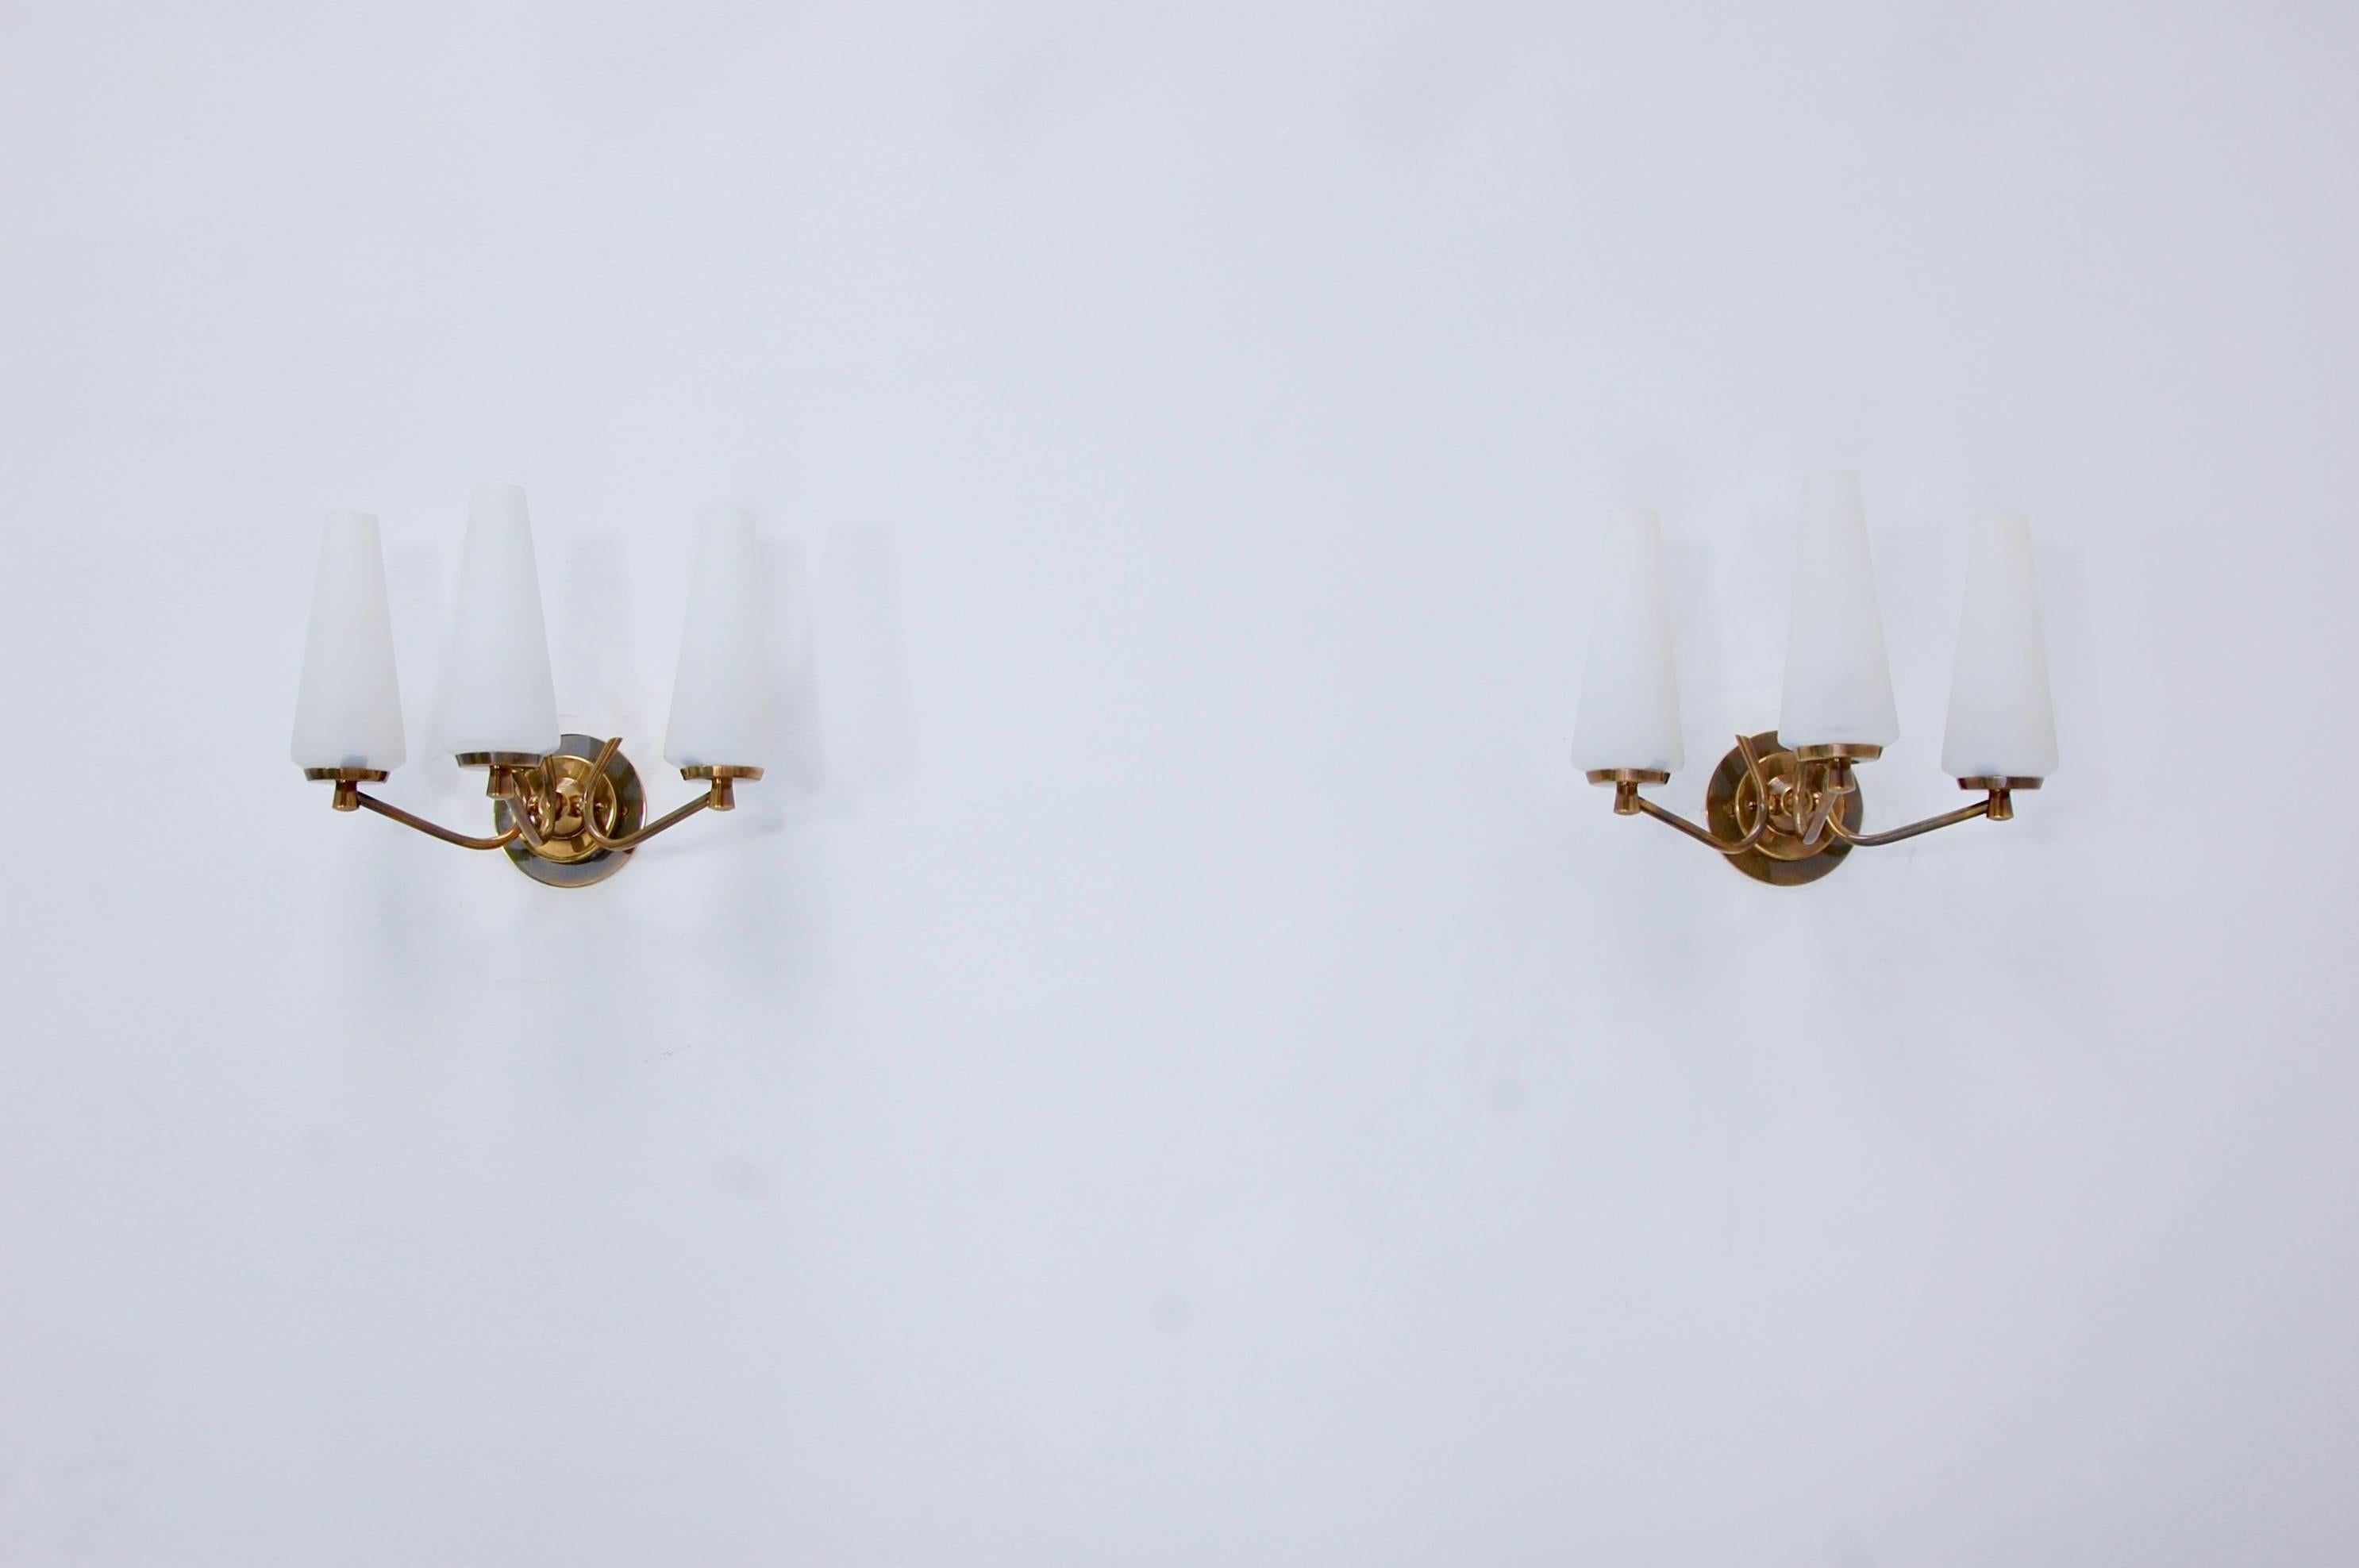 A pair of Classic brass and three glass shades 1950s sconces from Italy. Fully restored, patina lacquered brass finish with a single E12 based socket per shade. Maximum wattage 40-60 watts per socket. Back plate has 2 ¾” centre to centre mounting